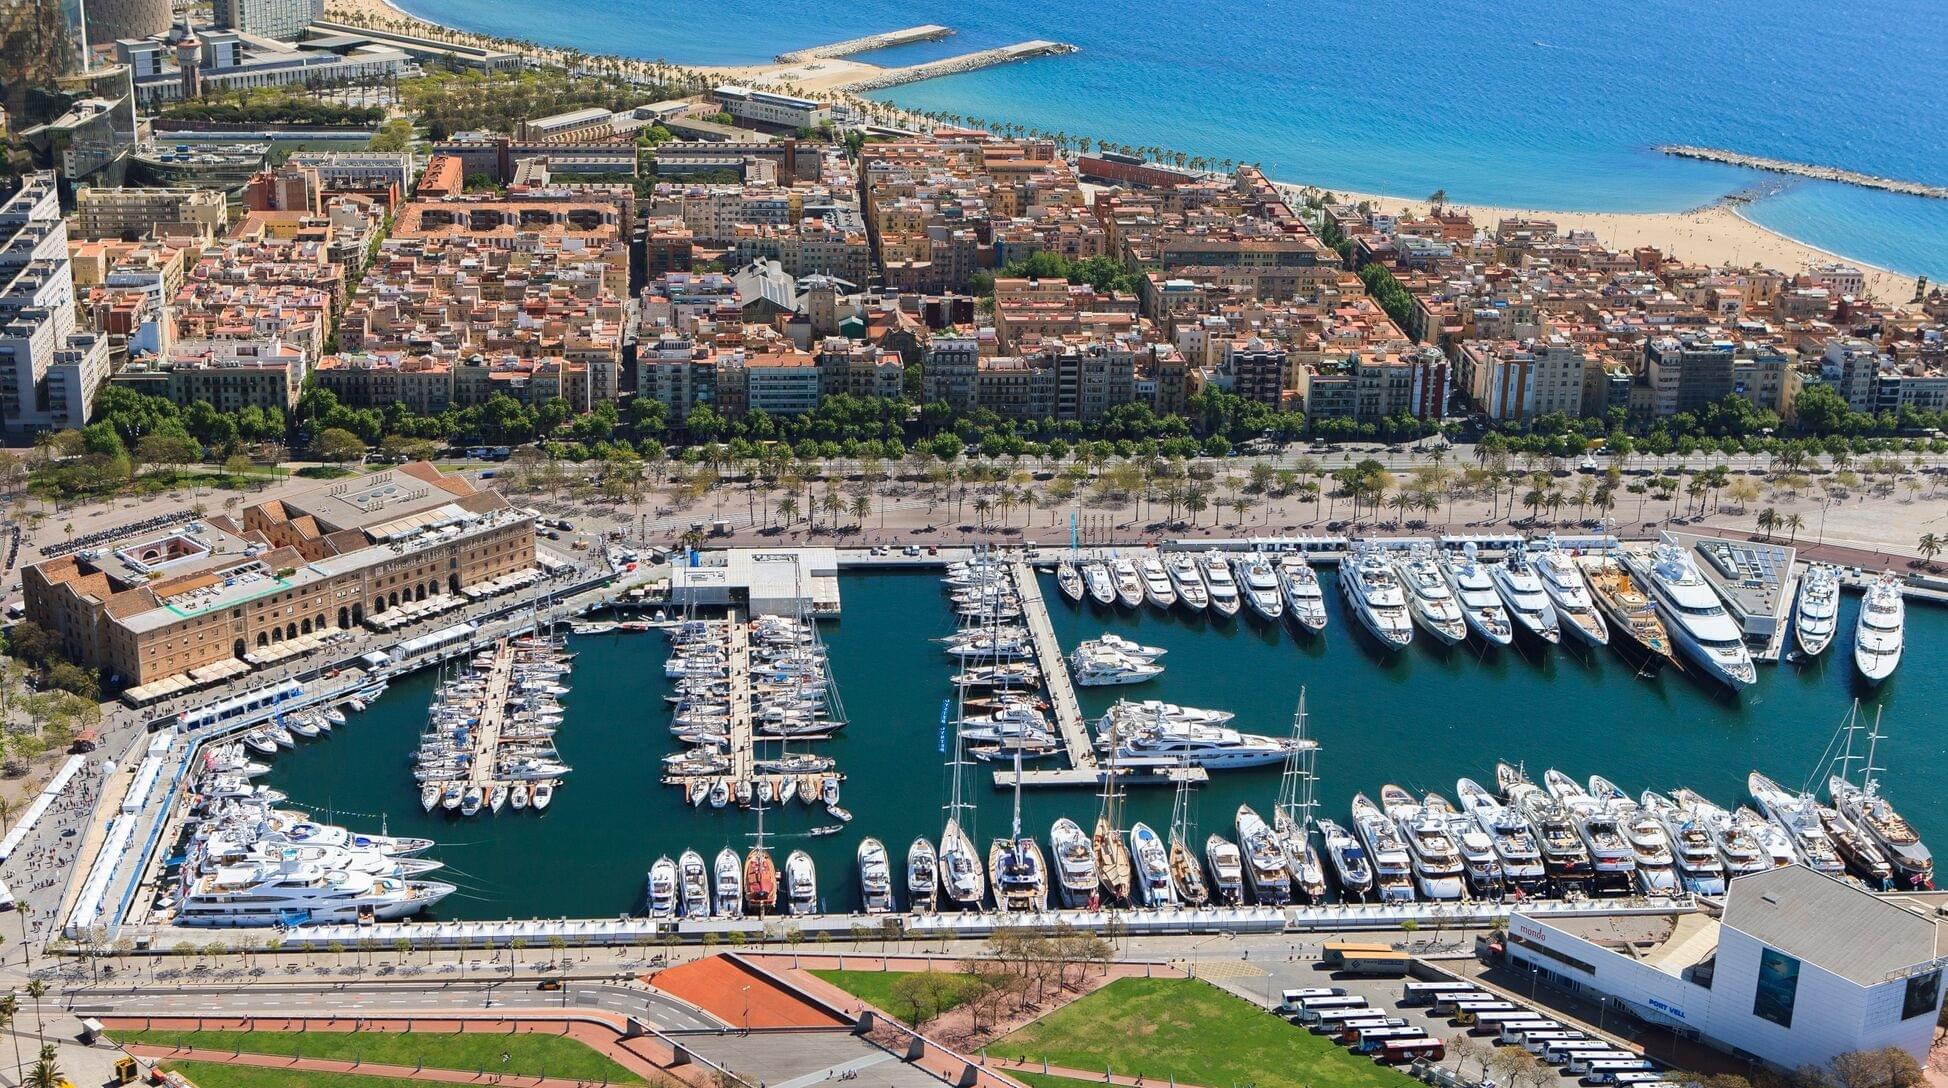 Port vell of Barcelona, the trading center of Medieval times, thriving in the modern times.